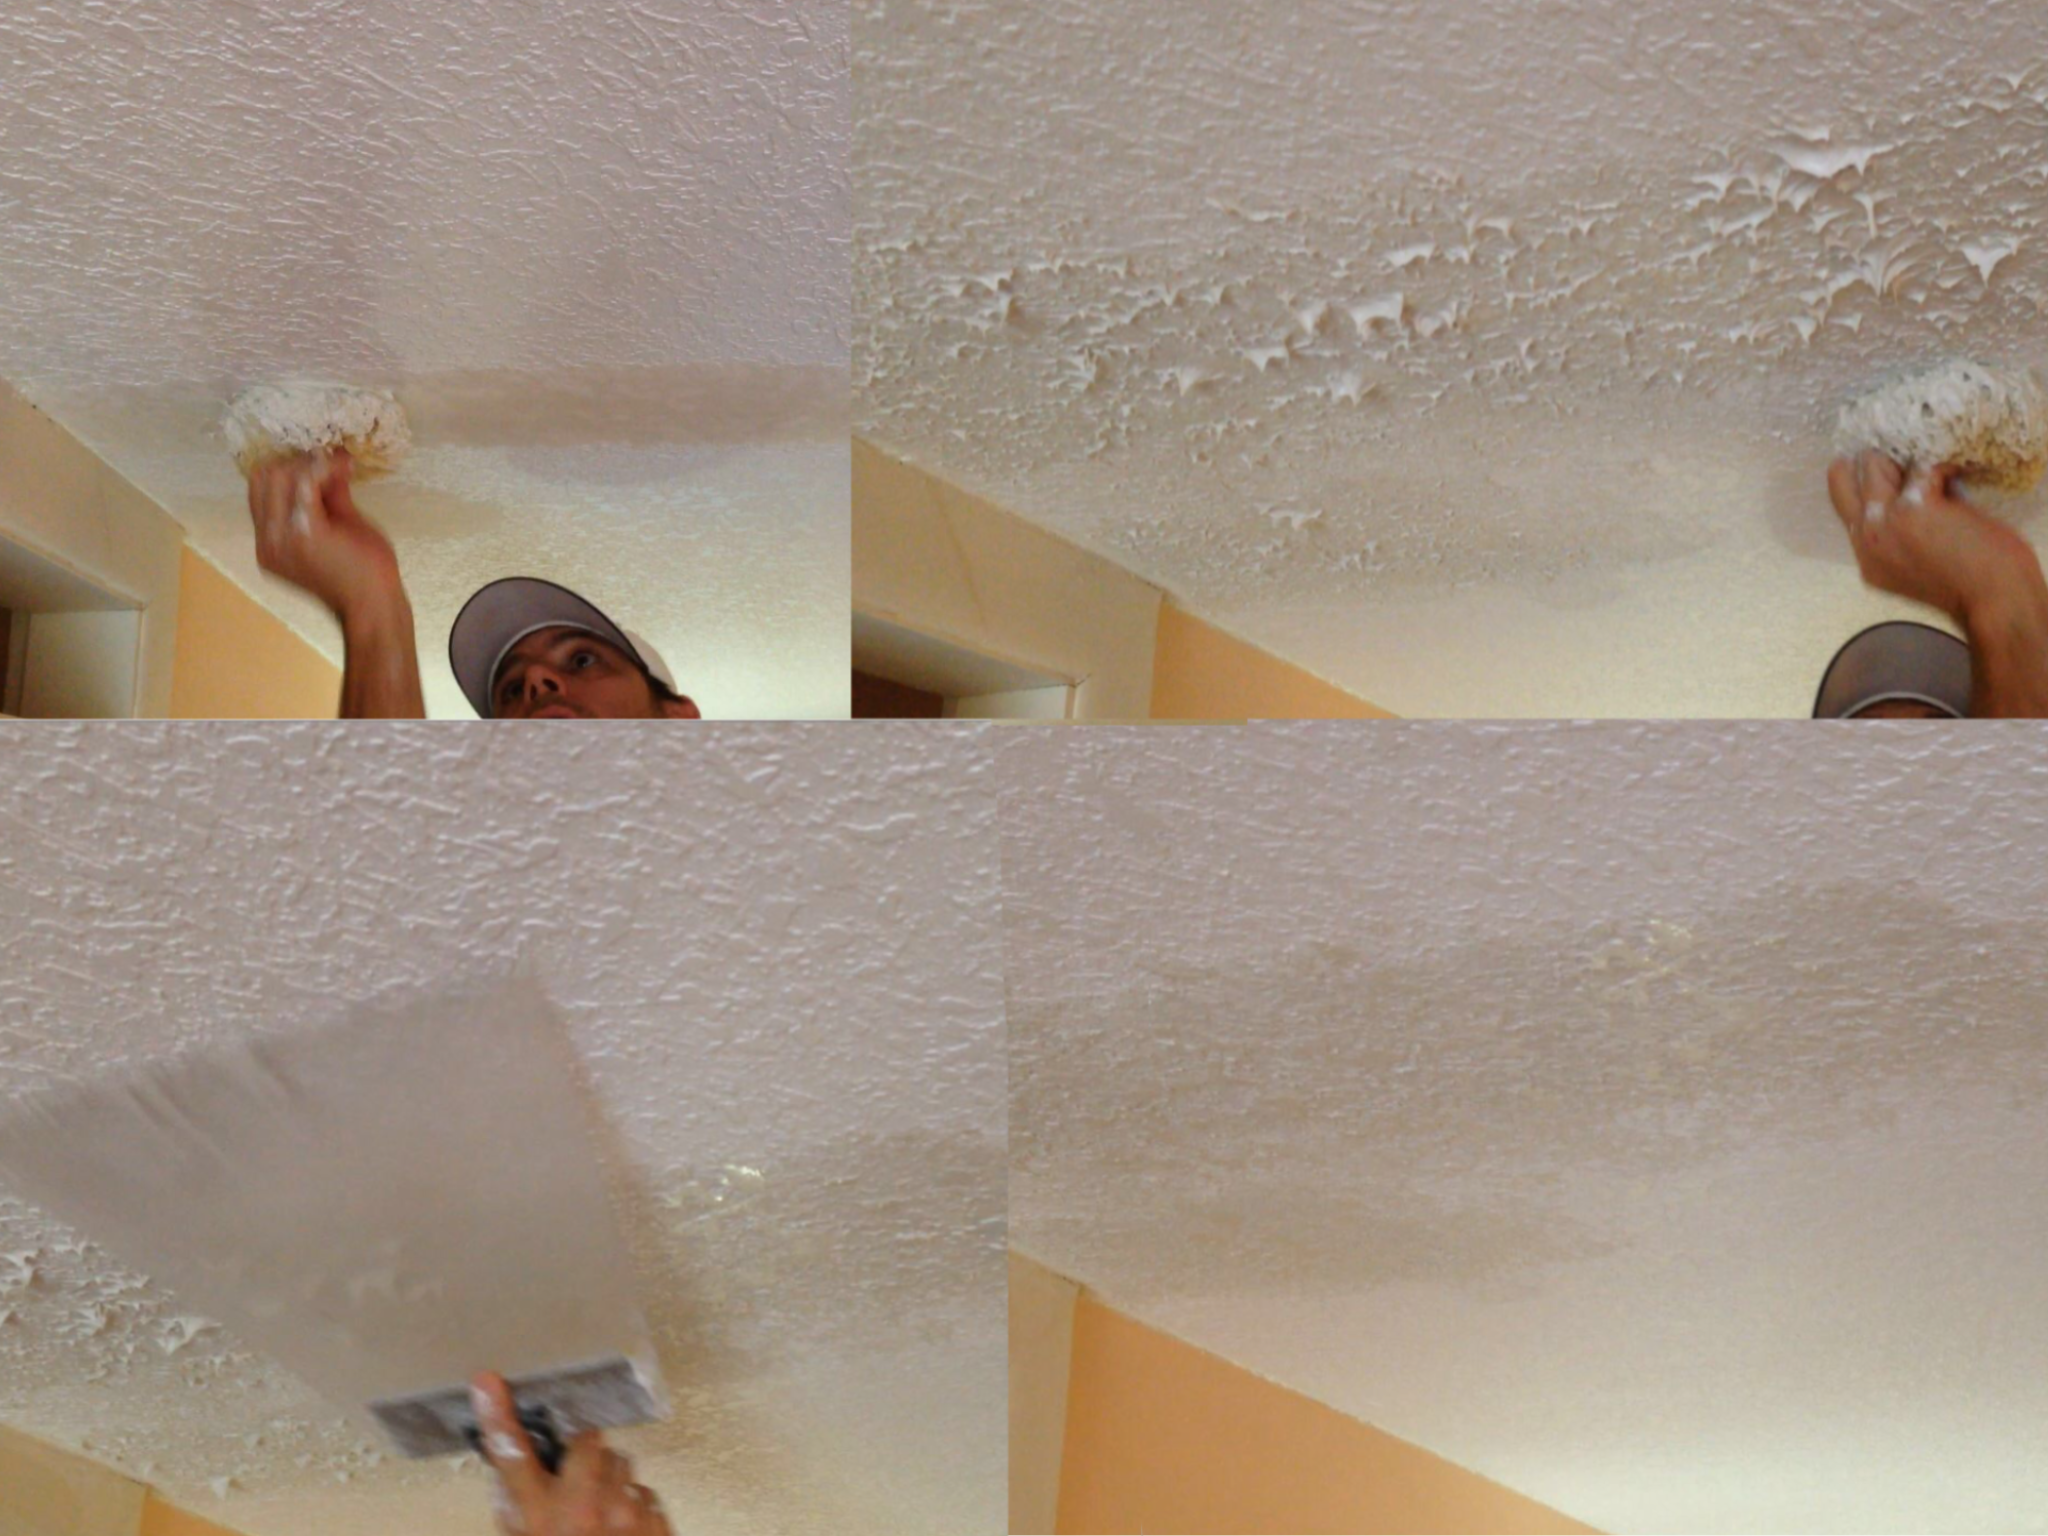  Knockdown Texture Sponge Drywall Wall Patch Ceiling